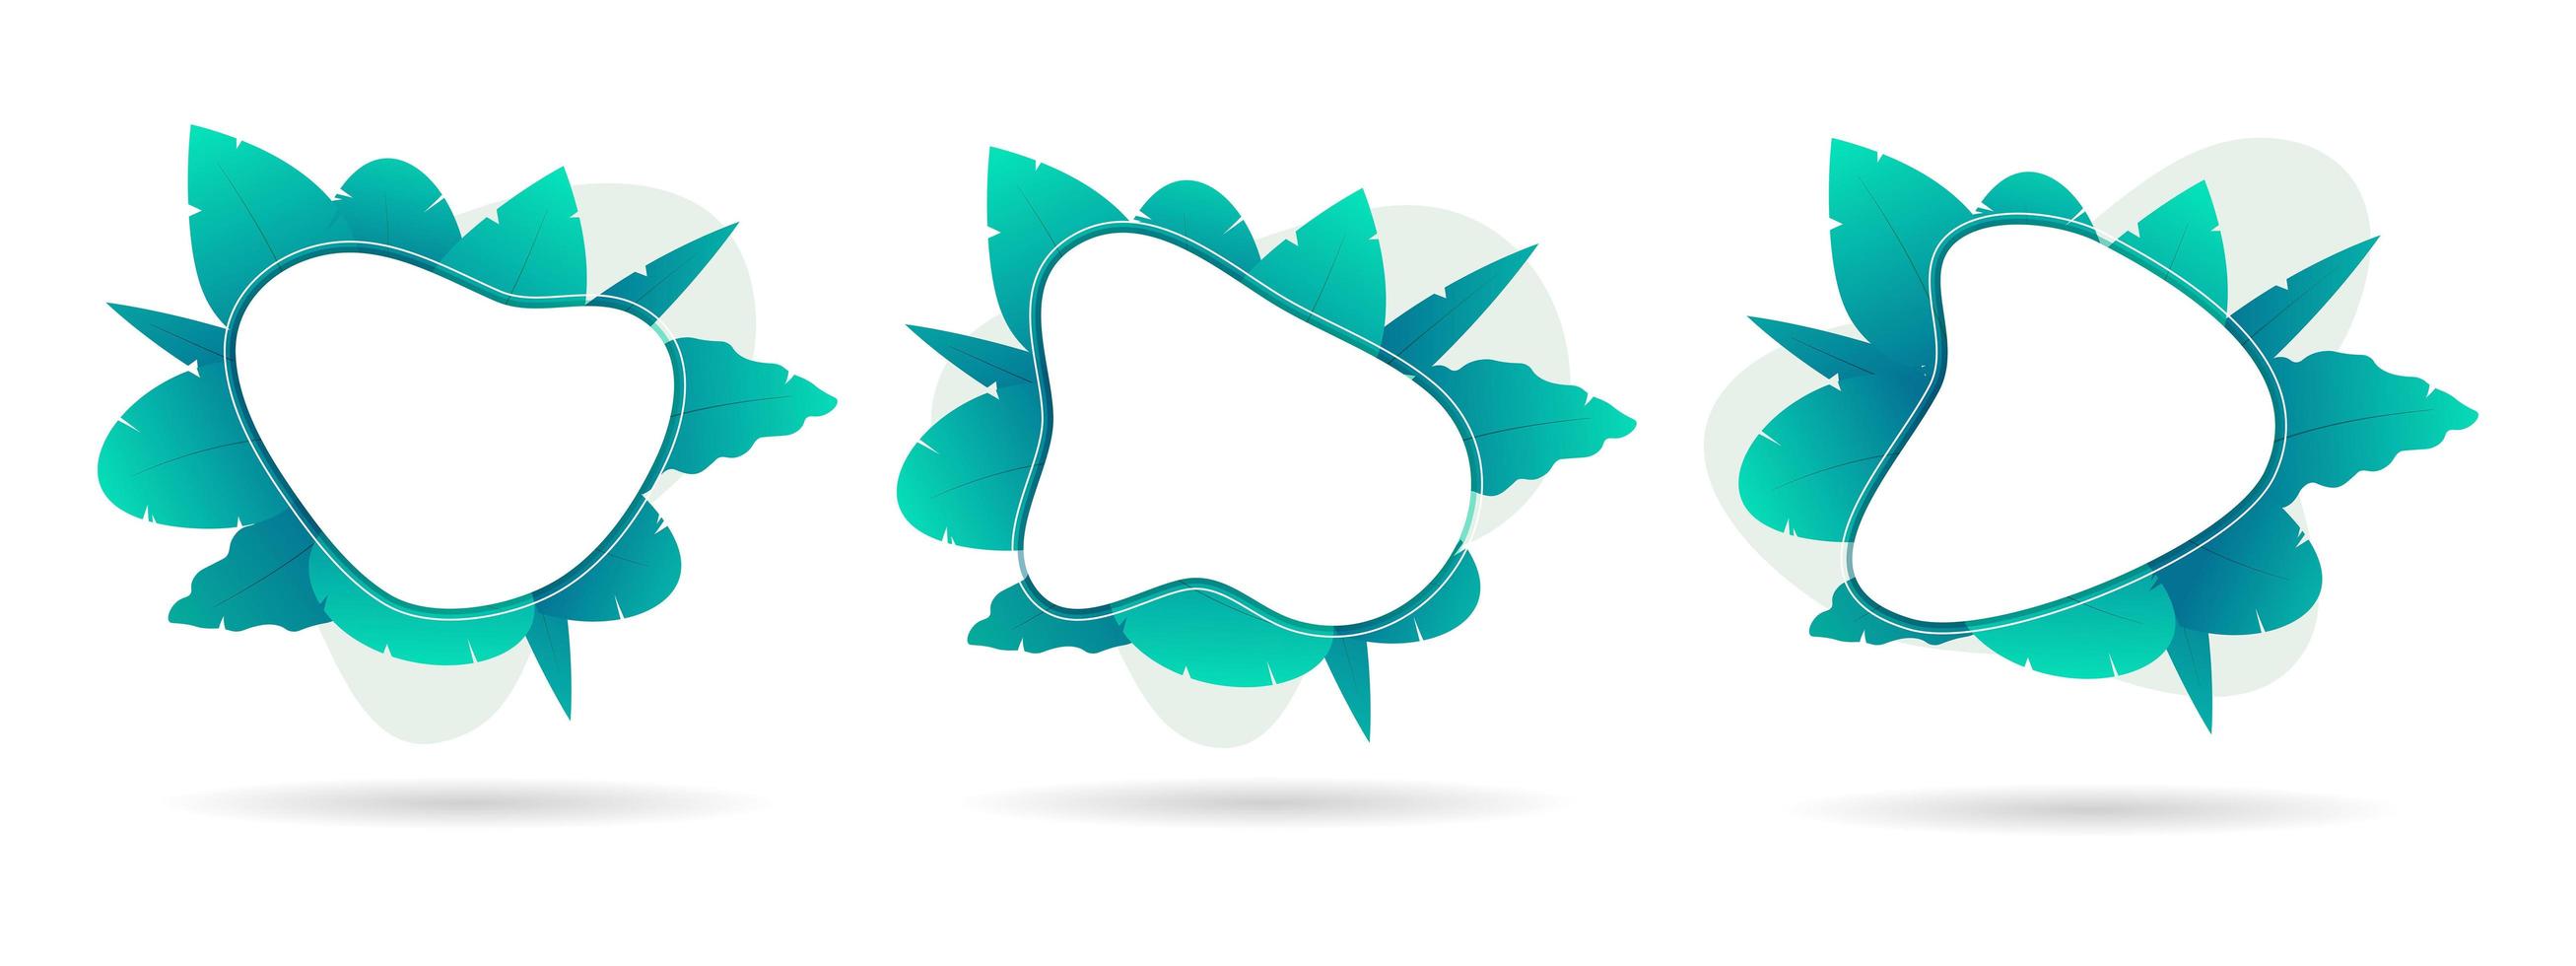 Abstract tropical badges vector